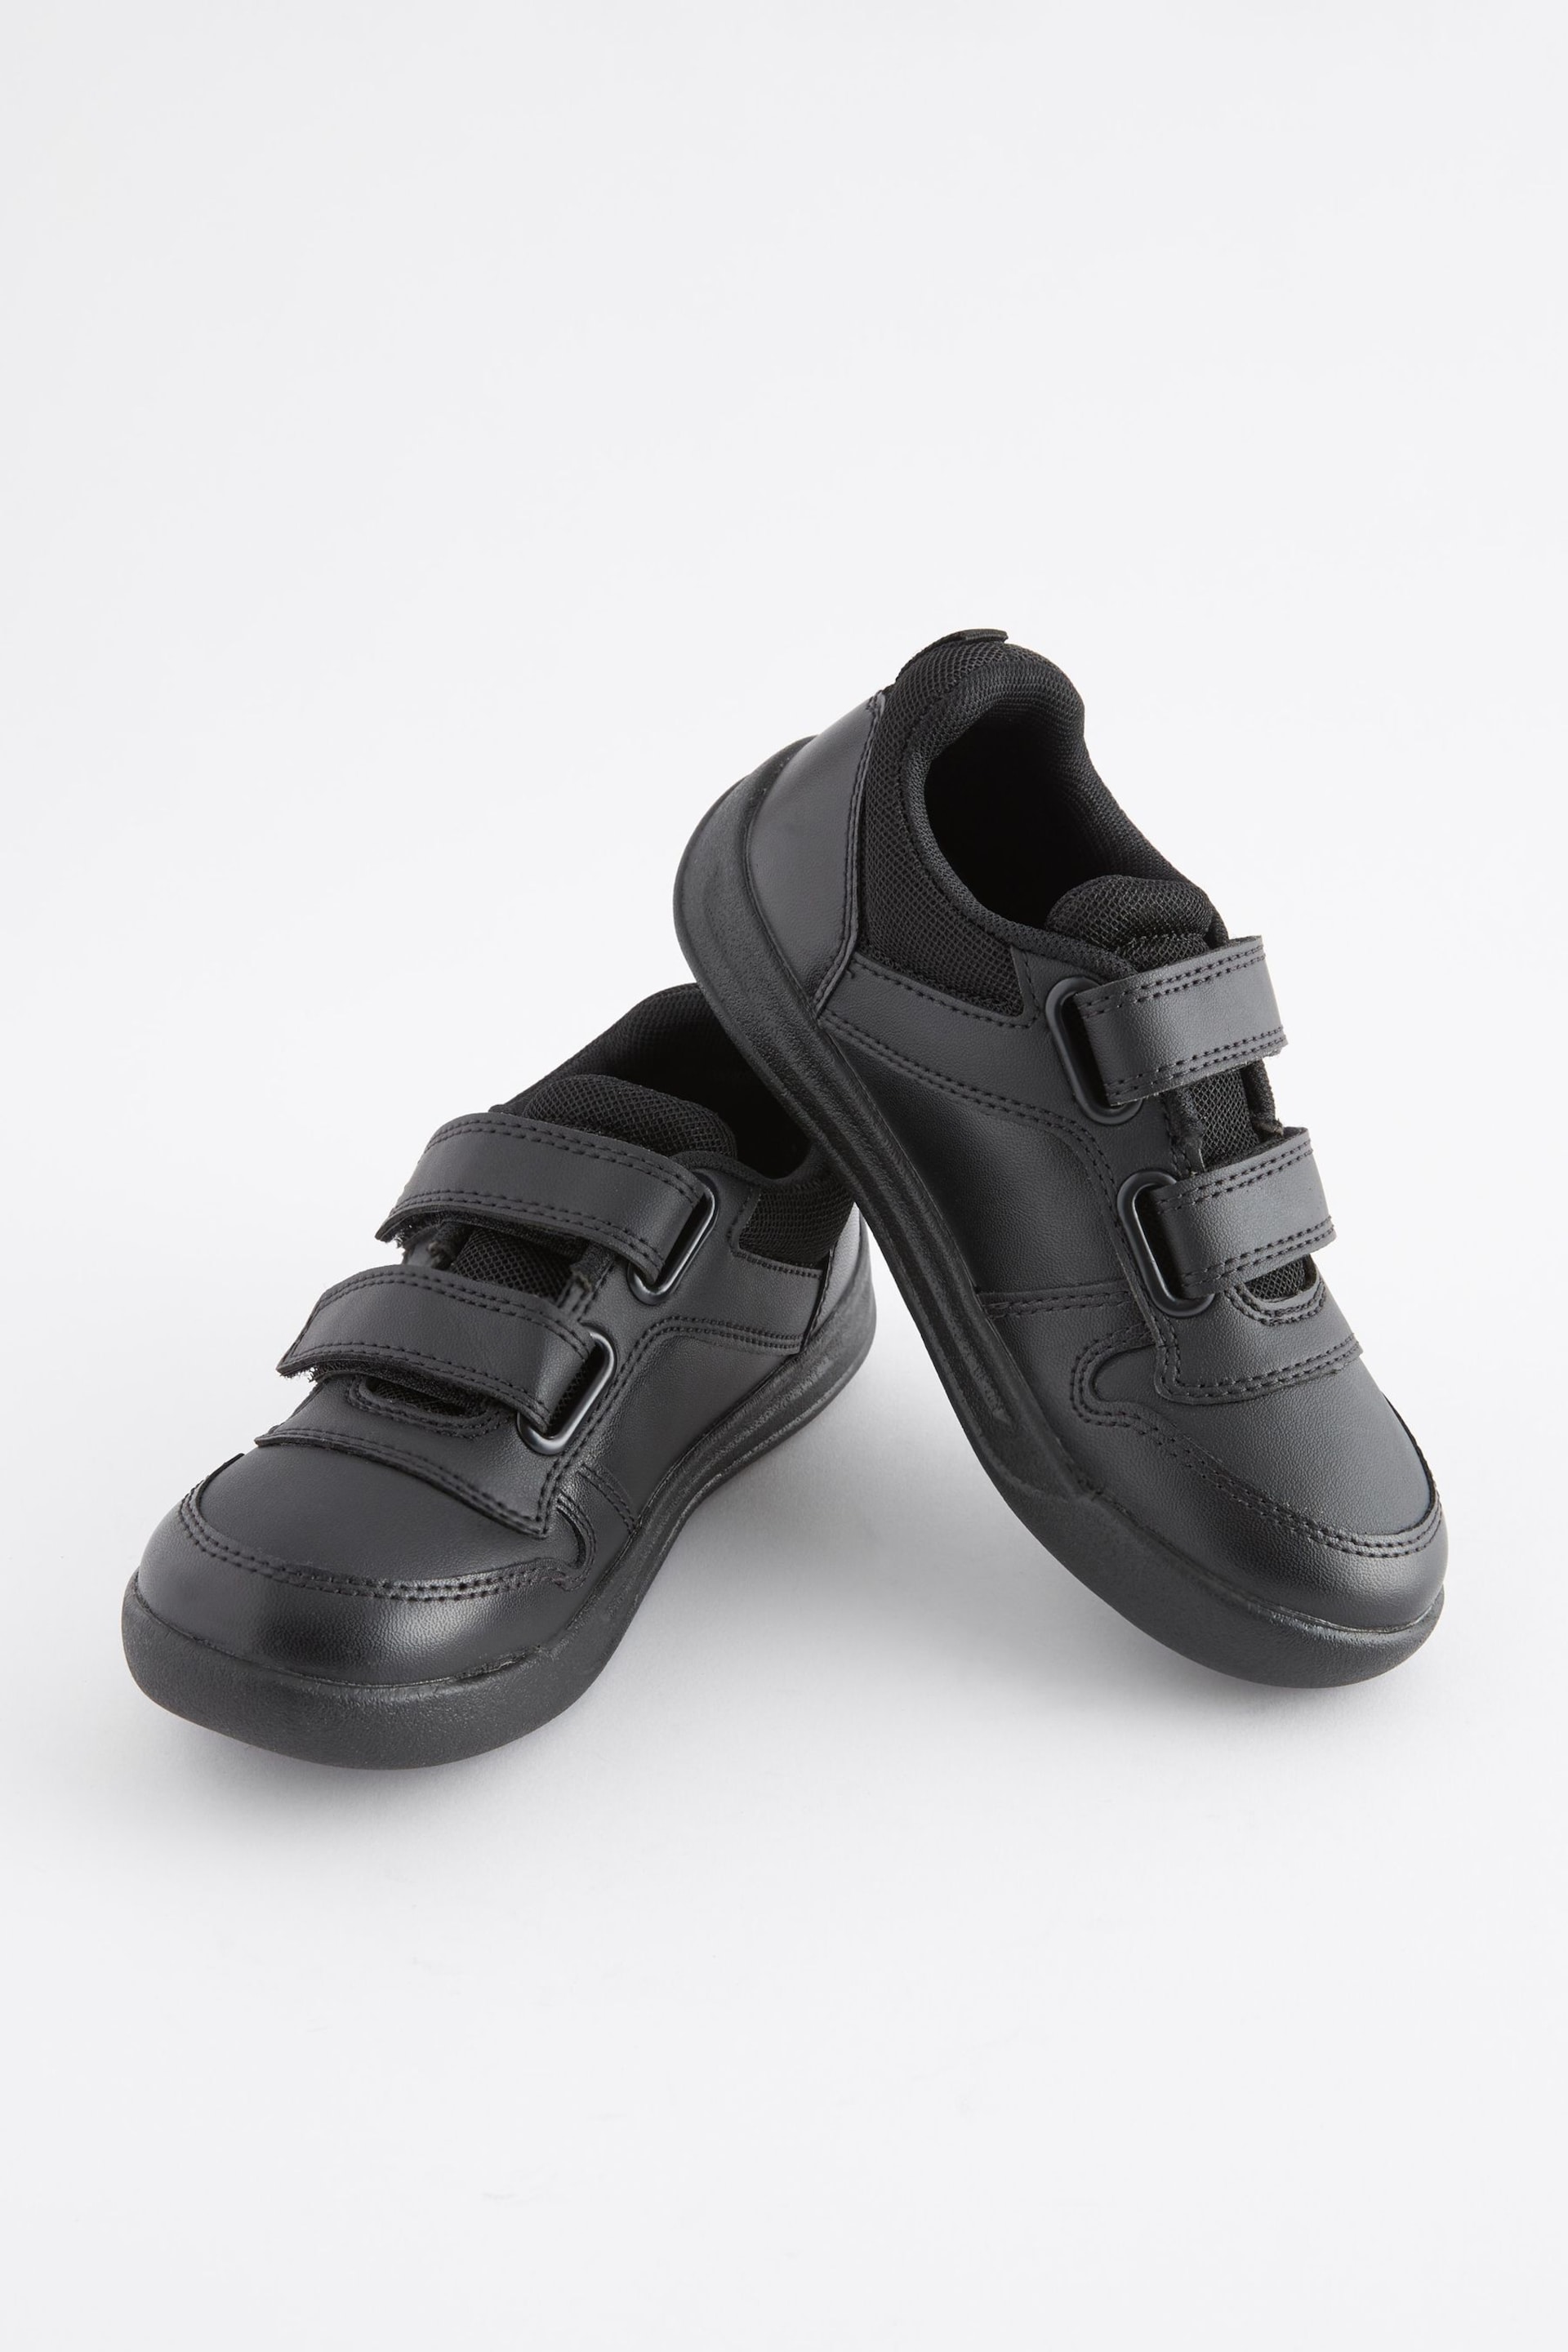 Black Strap Touch Fasten Wide Fit (G) School Trainers - Image 1 of 10